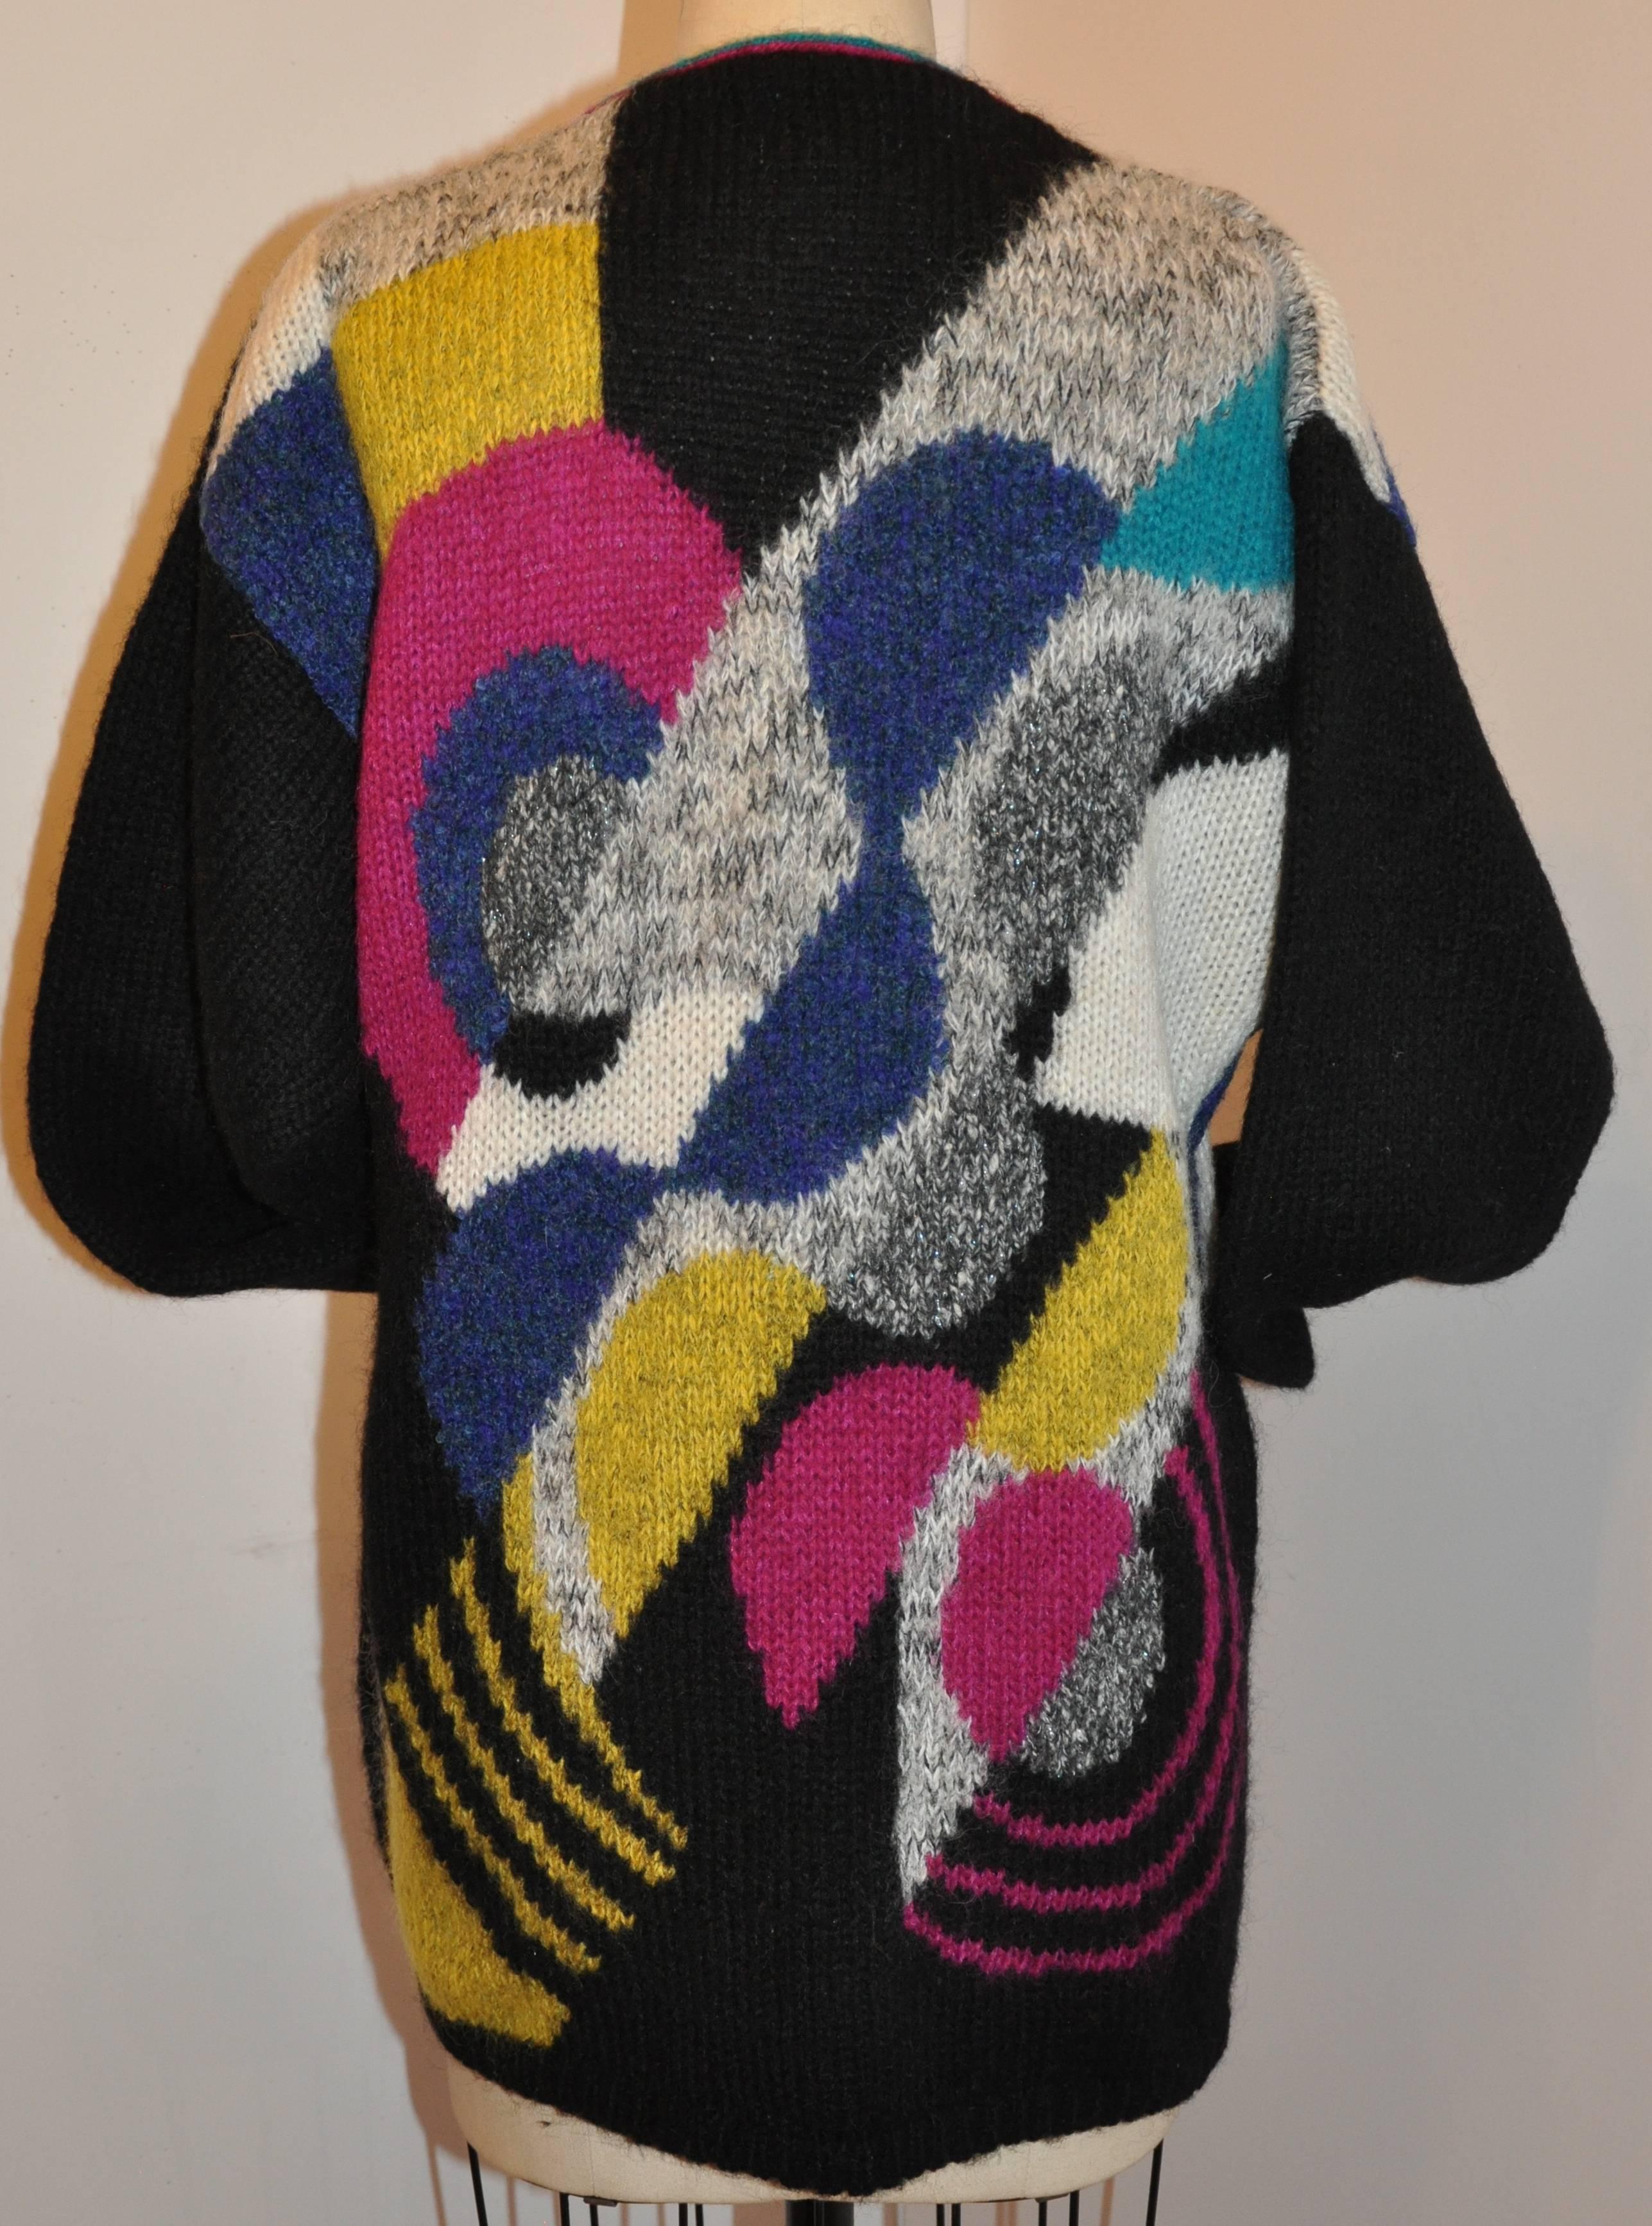      Cervelle wonderful multi-color bold abstract woven blend of wool, acrylic, mohair and nylon three button front cardigan is detailed with two set-in front pockets. The shoulders measures 21